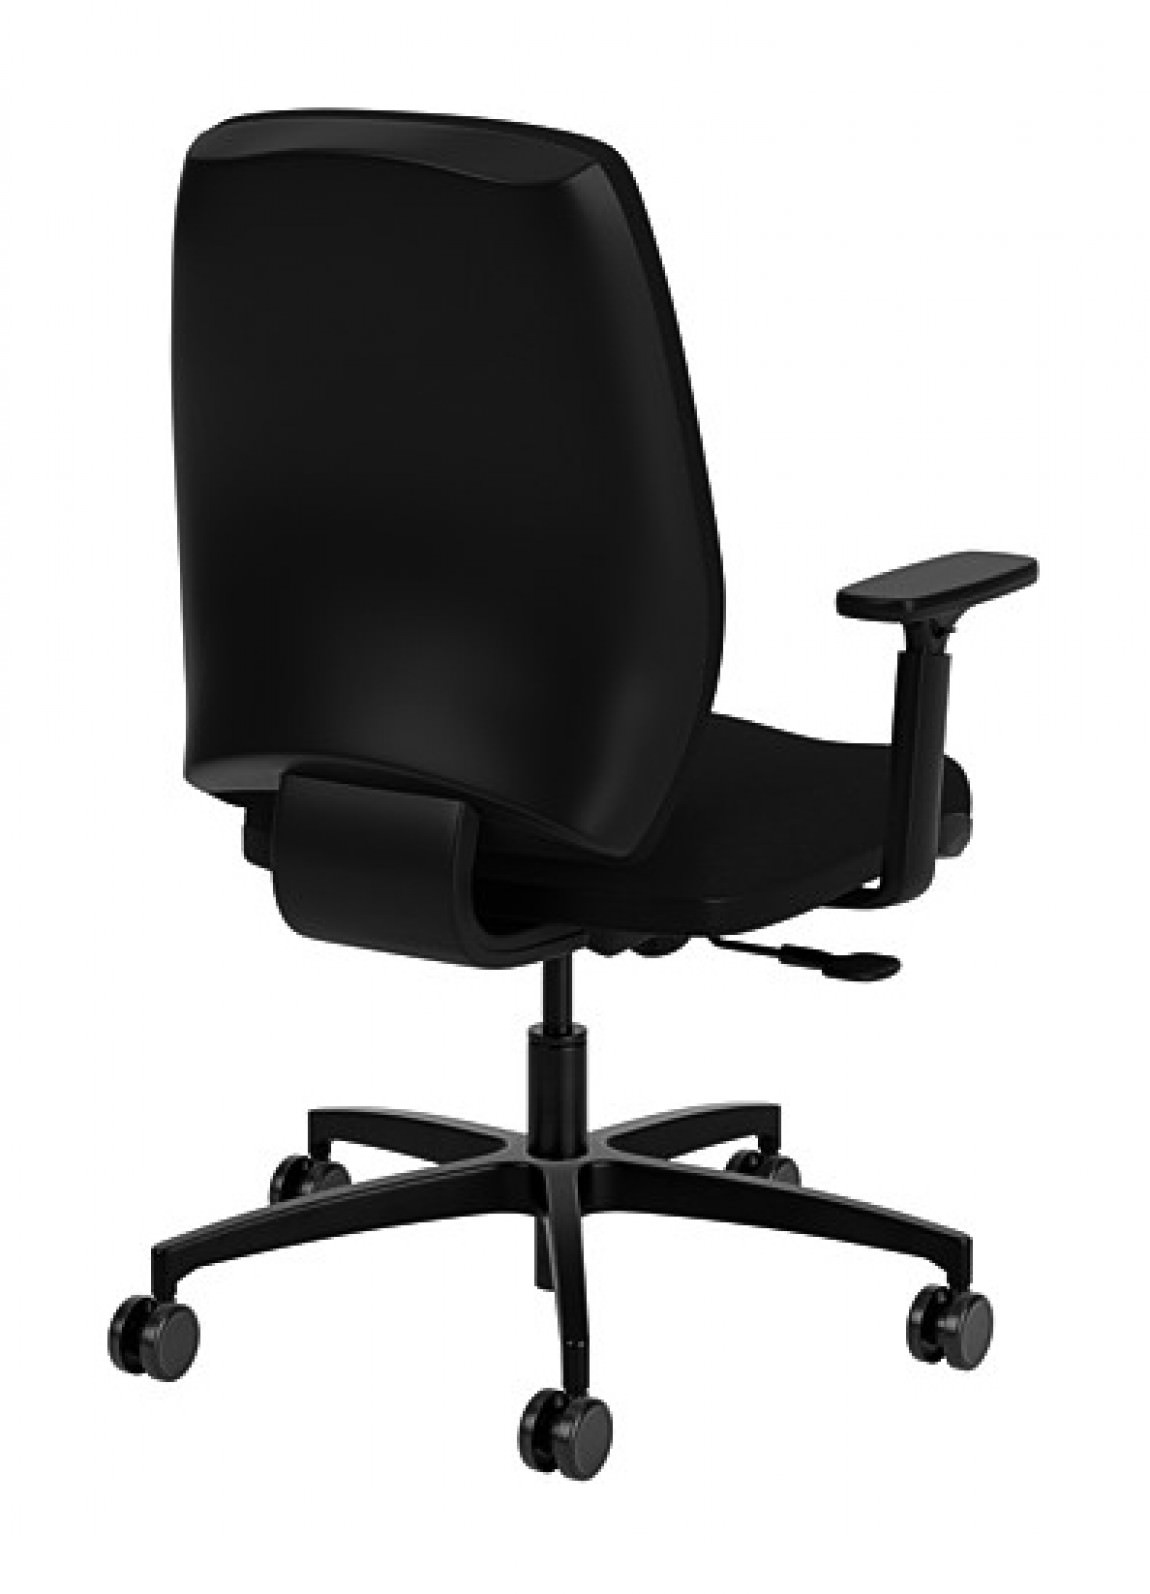 Mid Back Task Chair with Arms